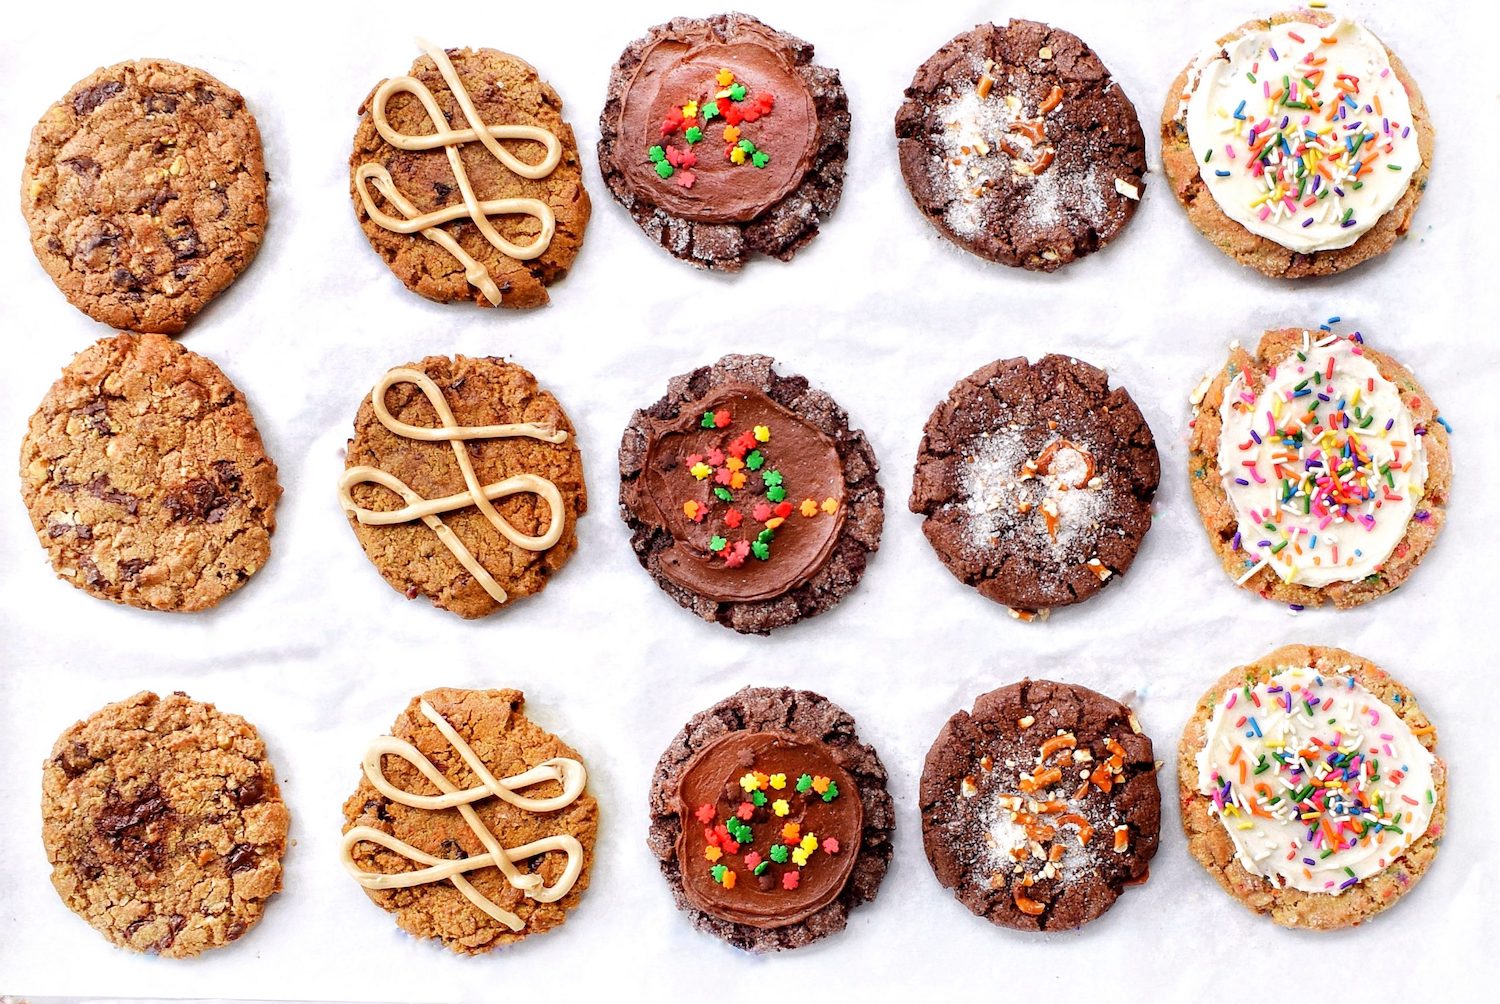 Schmackary's Cookies, a bakery franchise opening its first location in San Diego, on a tray 